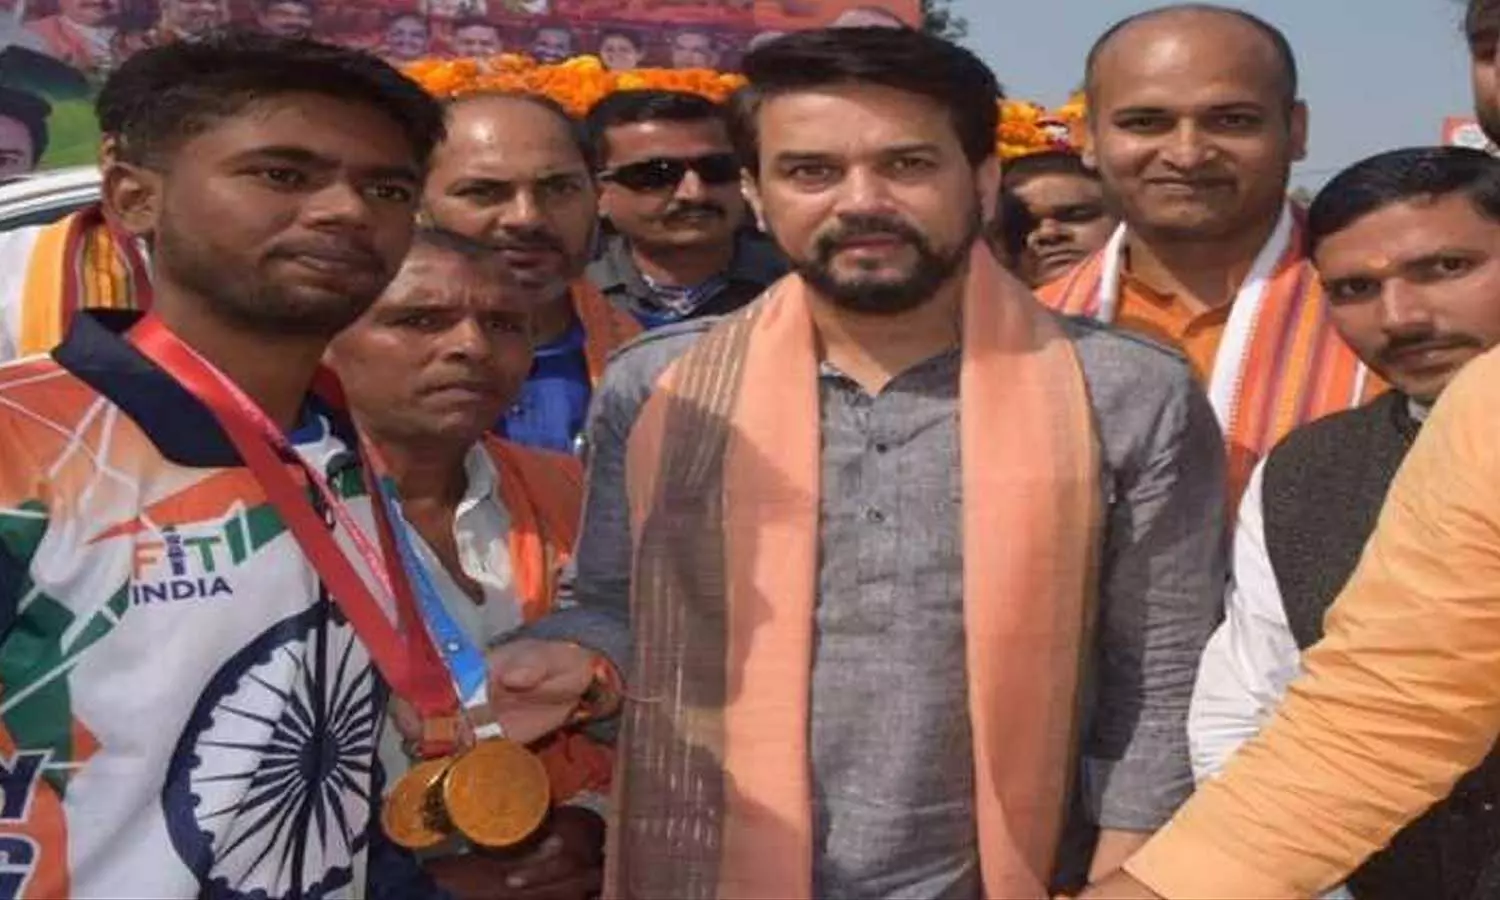 Siddharth Maurya, who brought gold medal in Under-19 race competition, was honored by Union Sports Minister Anurag Thakur